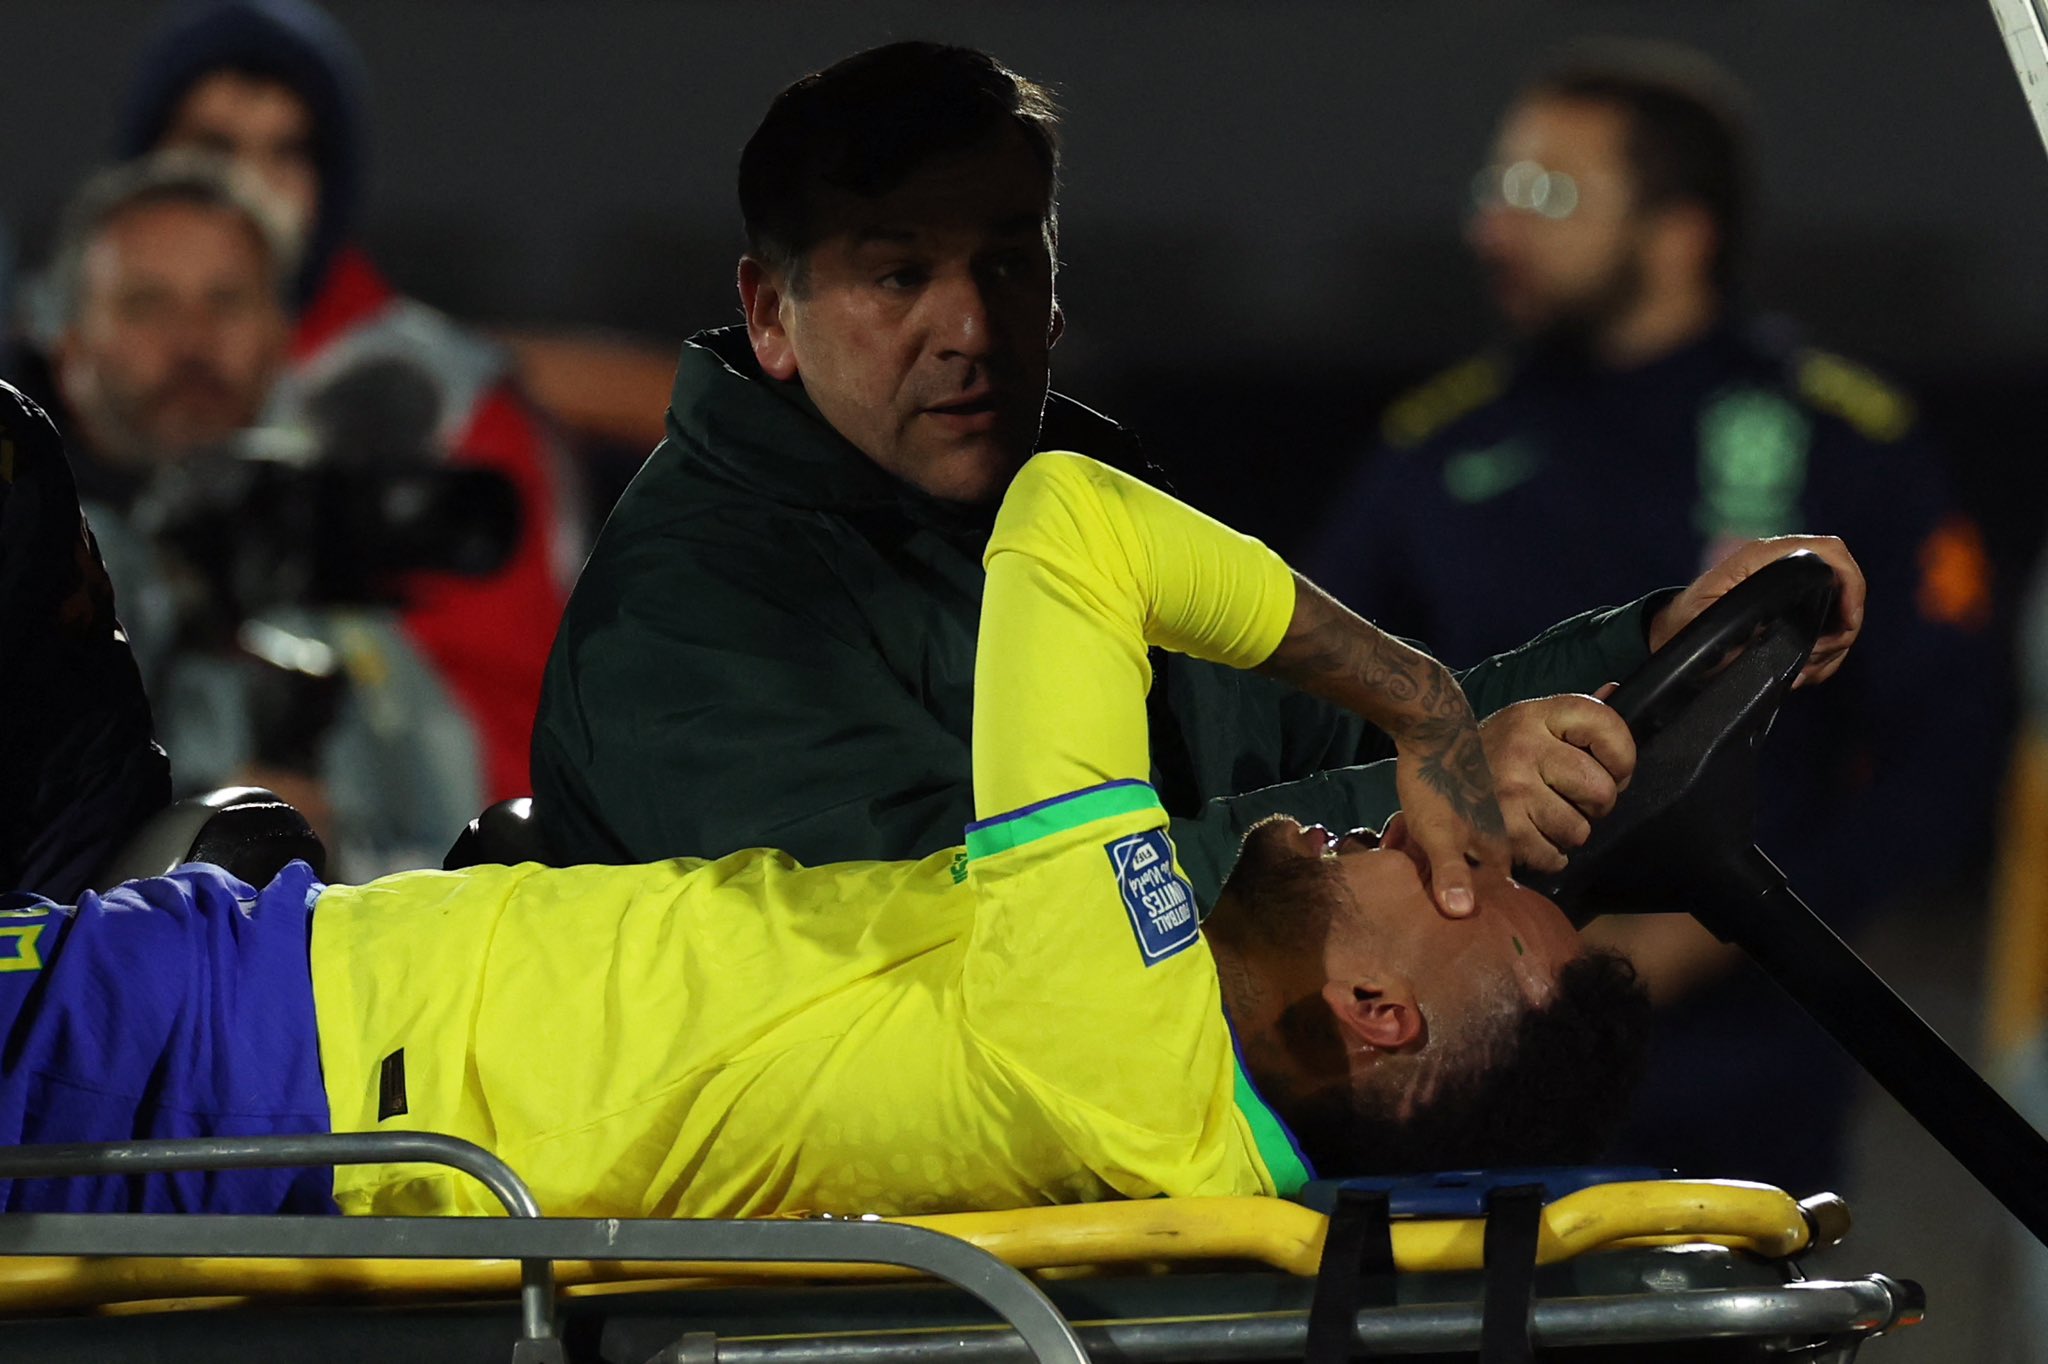 Fabrizio Romano on X: "Neymar Jr leaves the pitch crying after new injury  tonight vs Uruguay! 🇧🇷 It looks like serious injury again for Ney as he  was going off on stretcher…